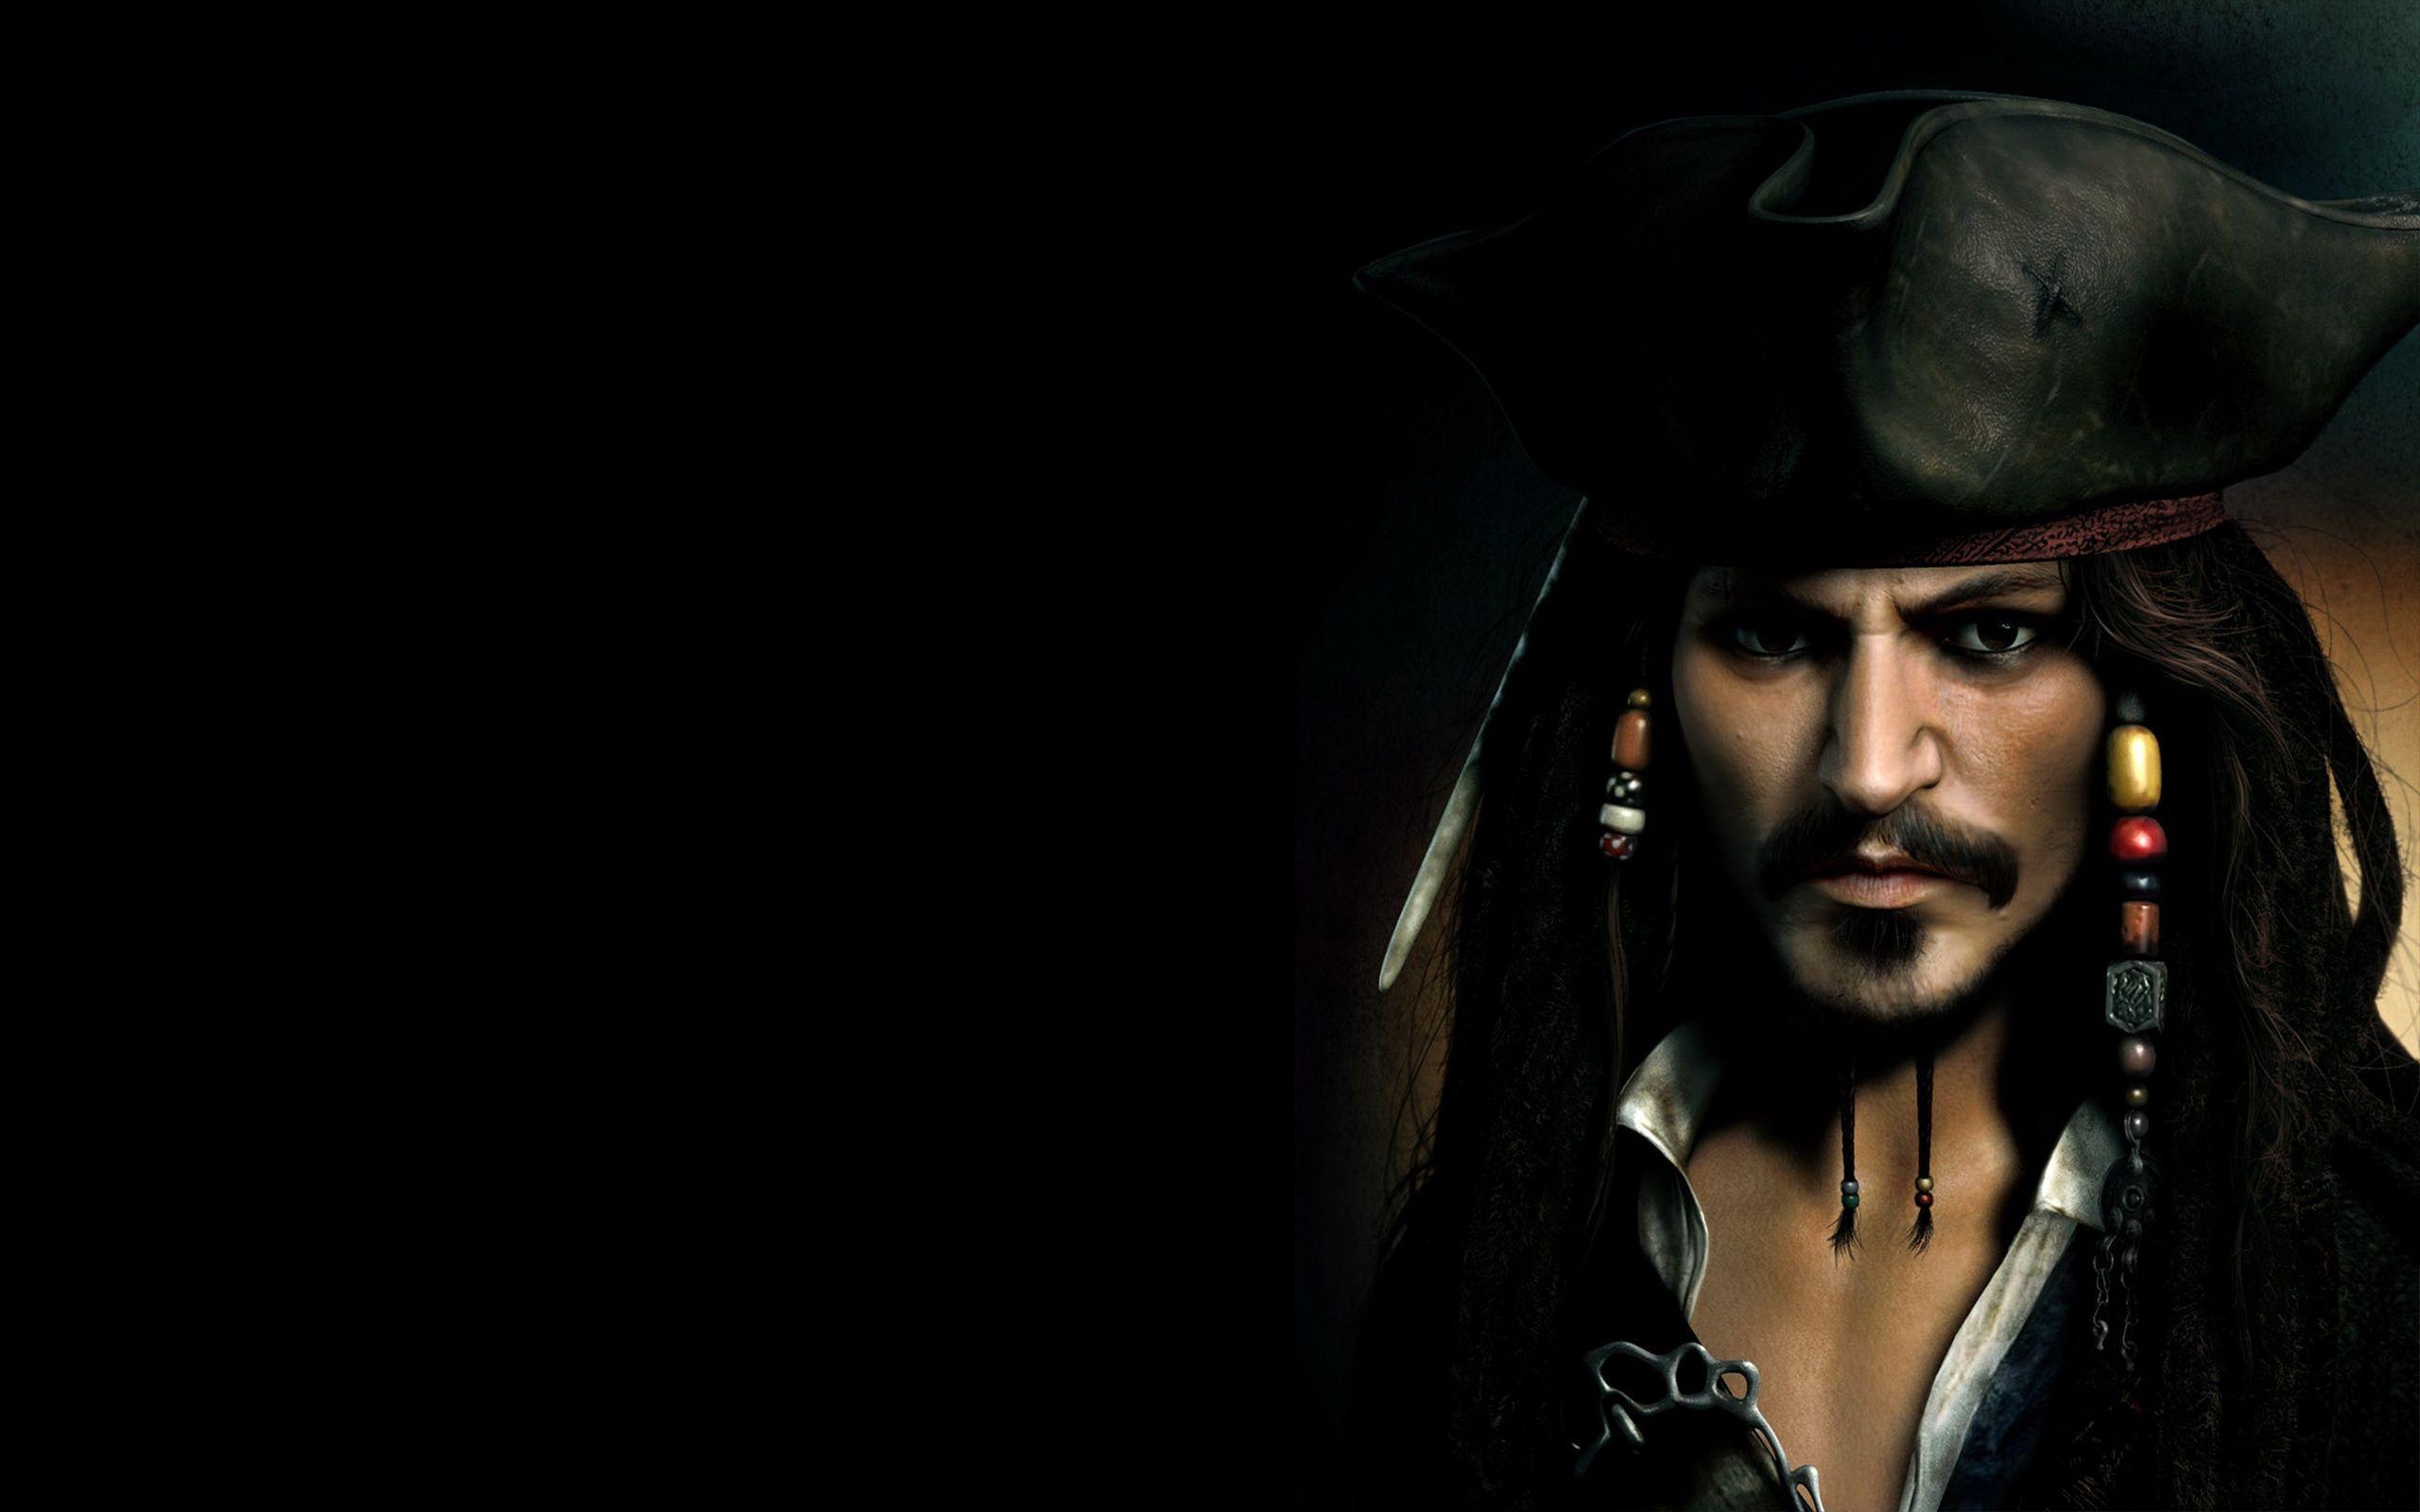 Pirates images Pirates of the Caribbean HD wallpaper and background 